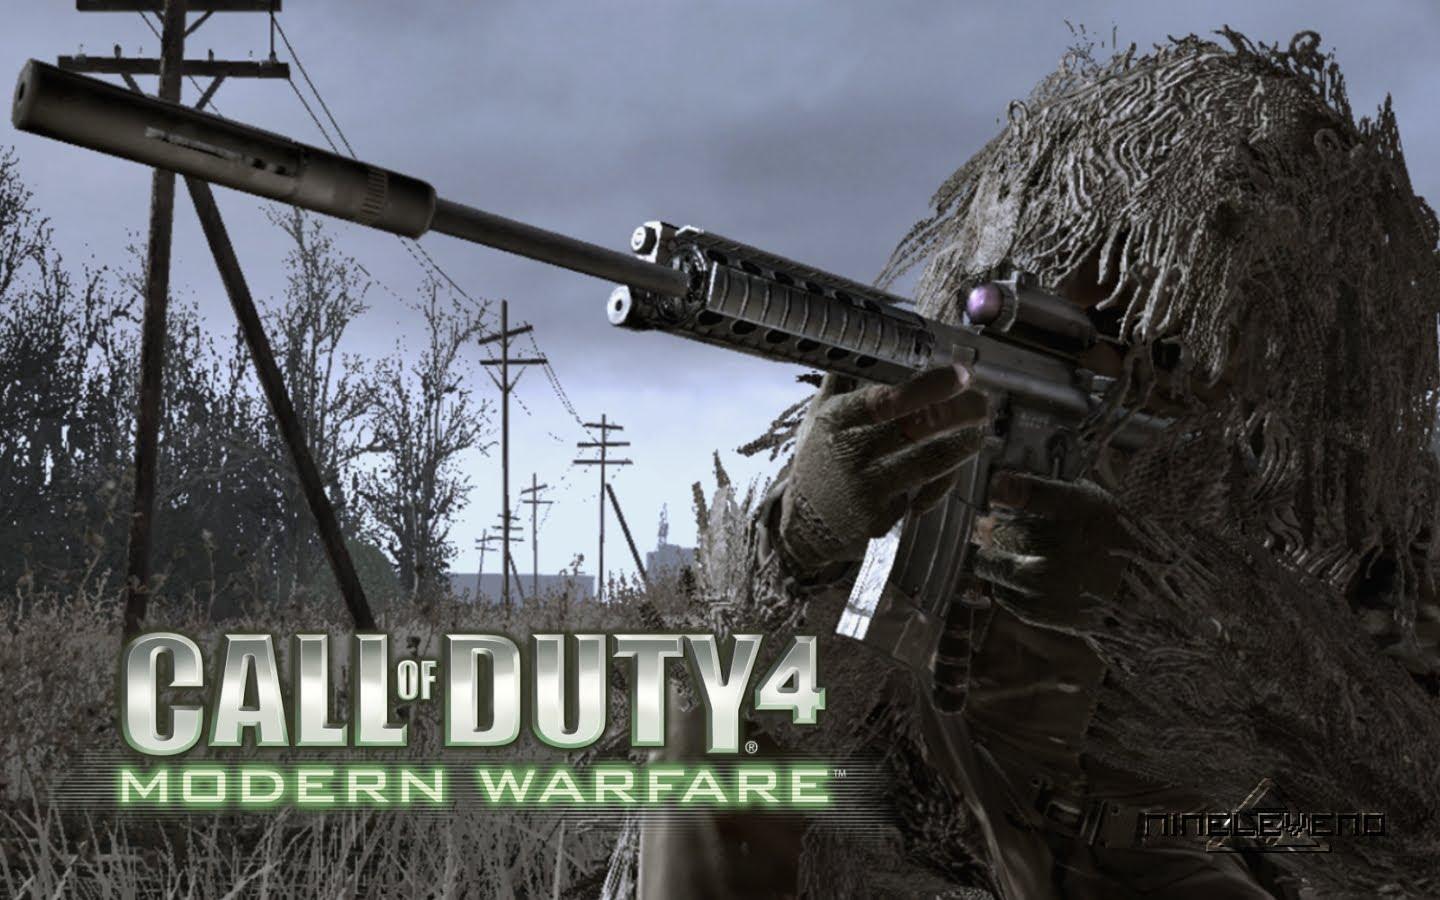 Call Of Duty 4 Warfare Ghillied Up [1080p] All Intels